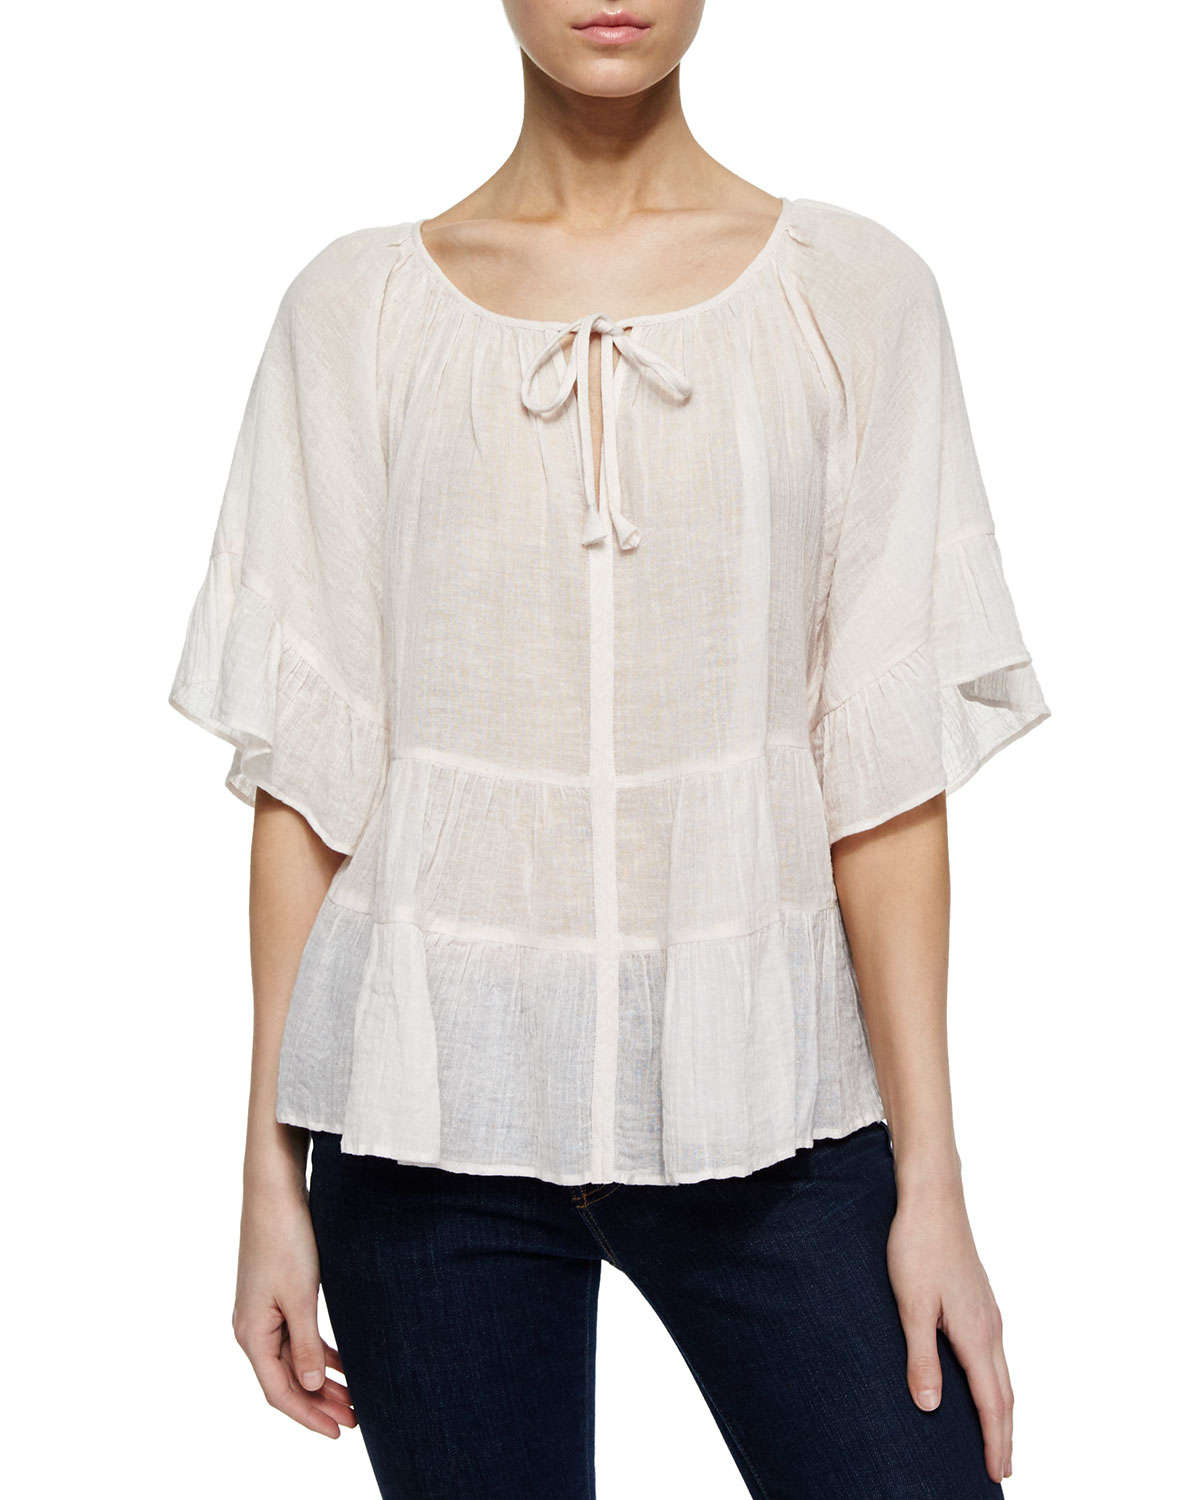 Lyst - Calypso St. Barth Ristabelle Opulesence Gauze Top in White